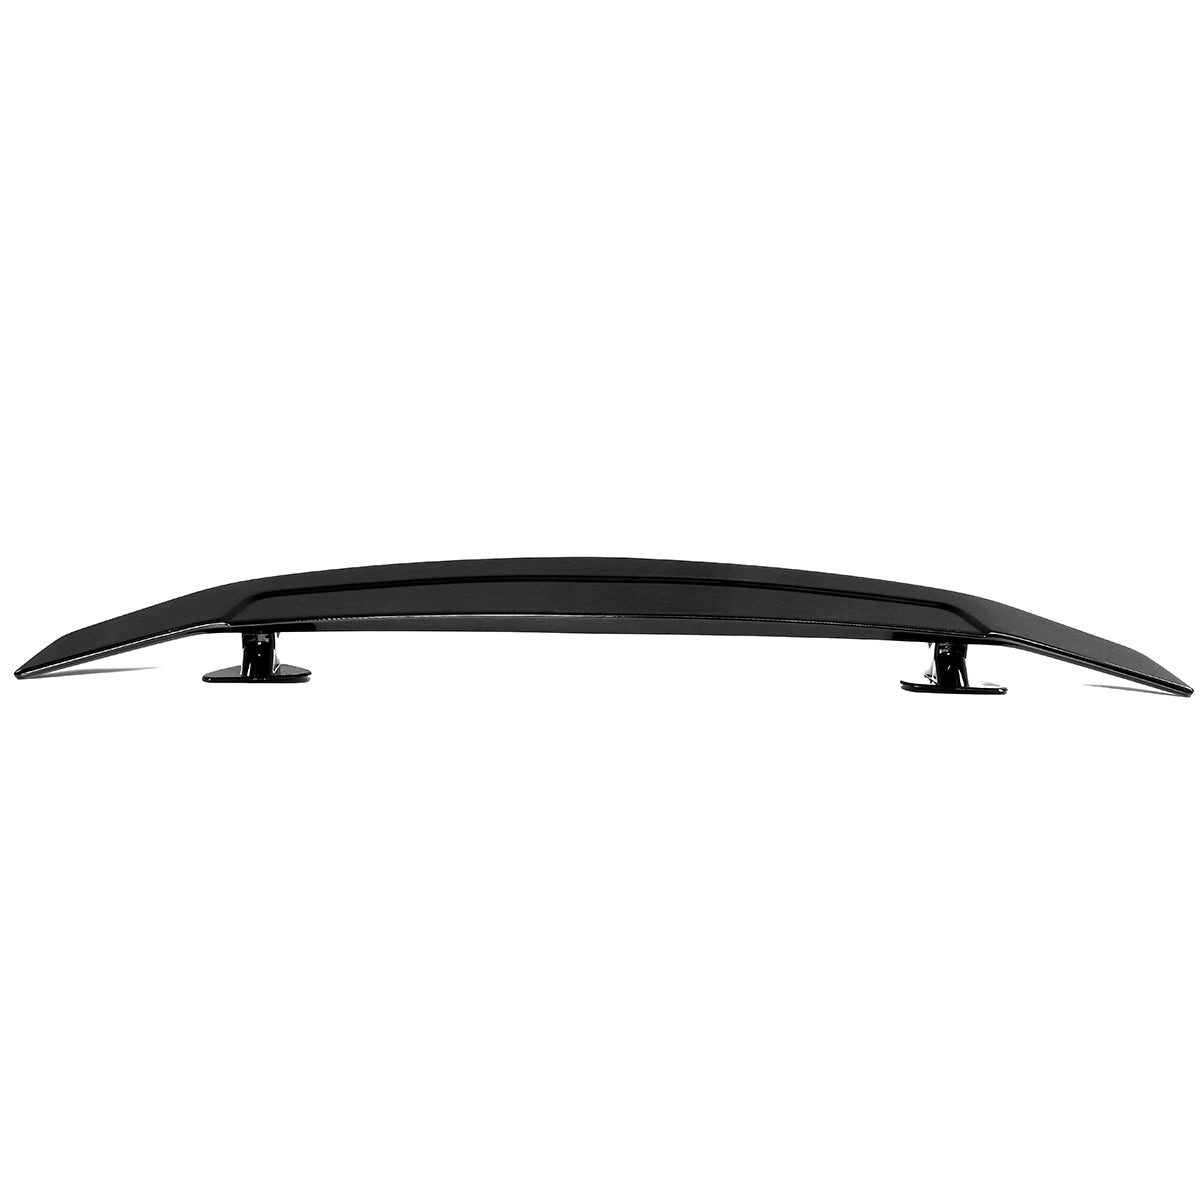 Universal Perforated Sedan Car Sports Tail Fixed Spoiler Wing Car Modified Rear Wing Brilliant Black - Auto GoShop